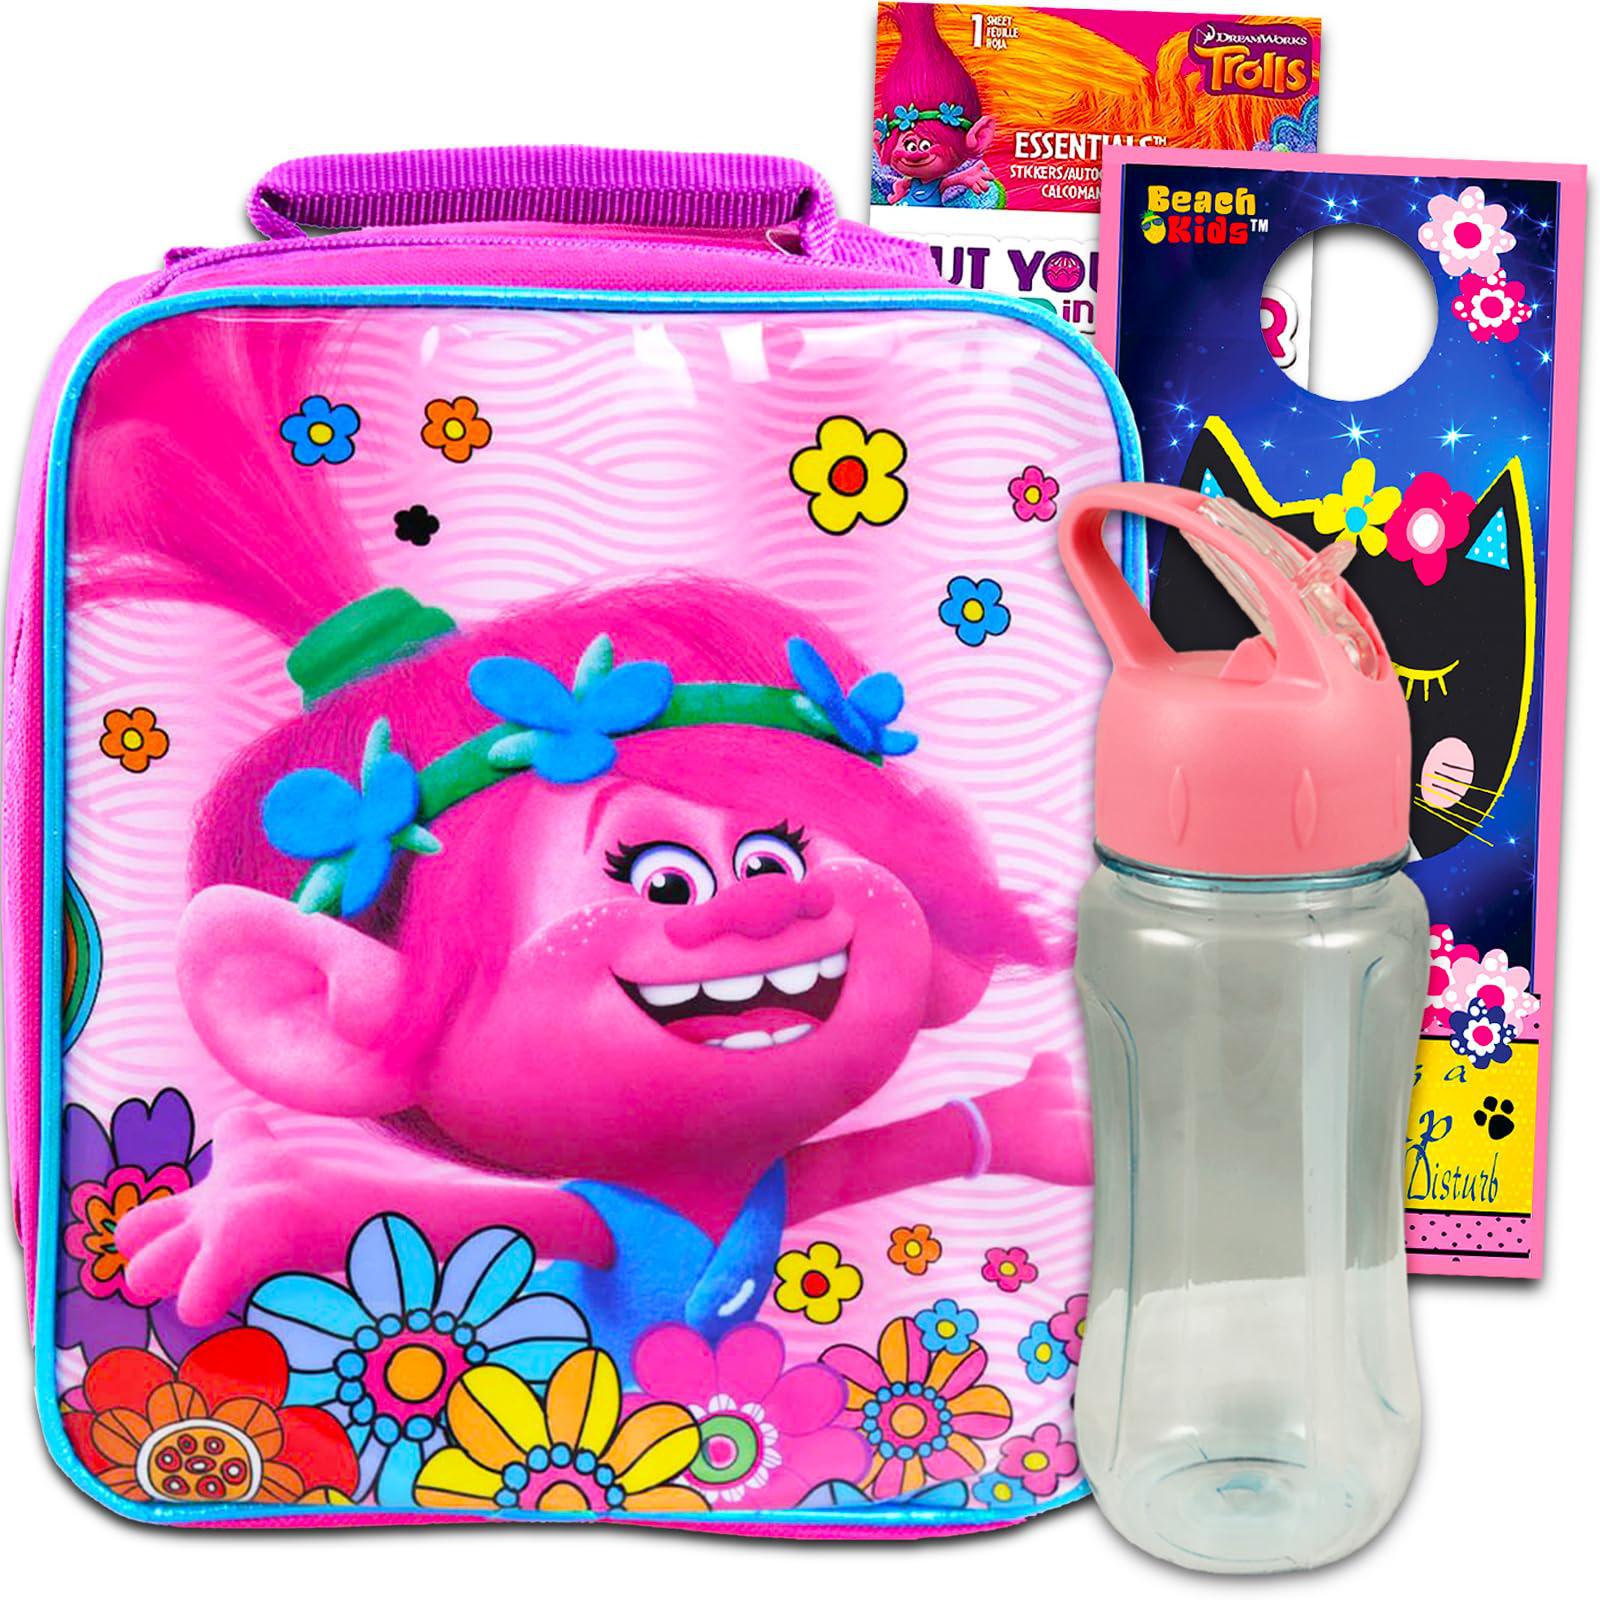 Fast Forward trolls lunch box and water bottle set for girls - trolls  school supplies bundle with insulated lunch bag and pink water bottl